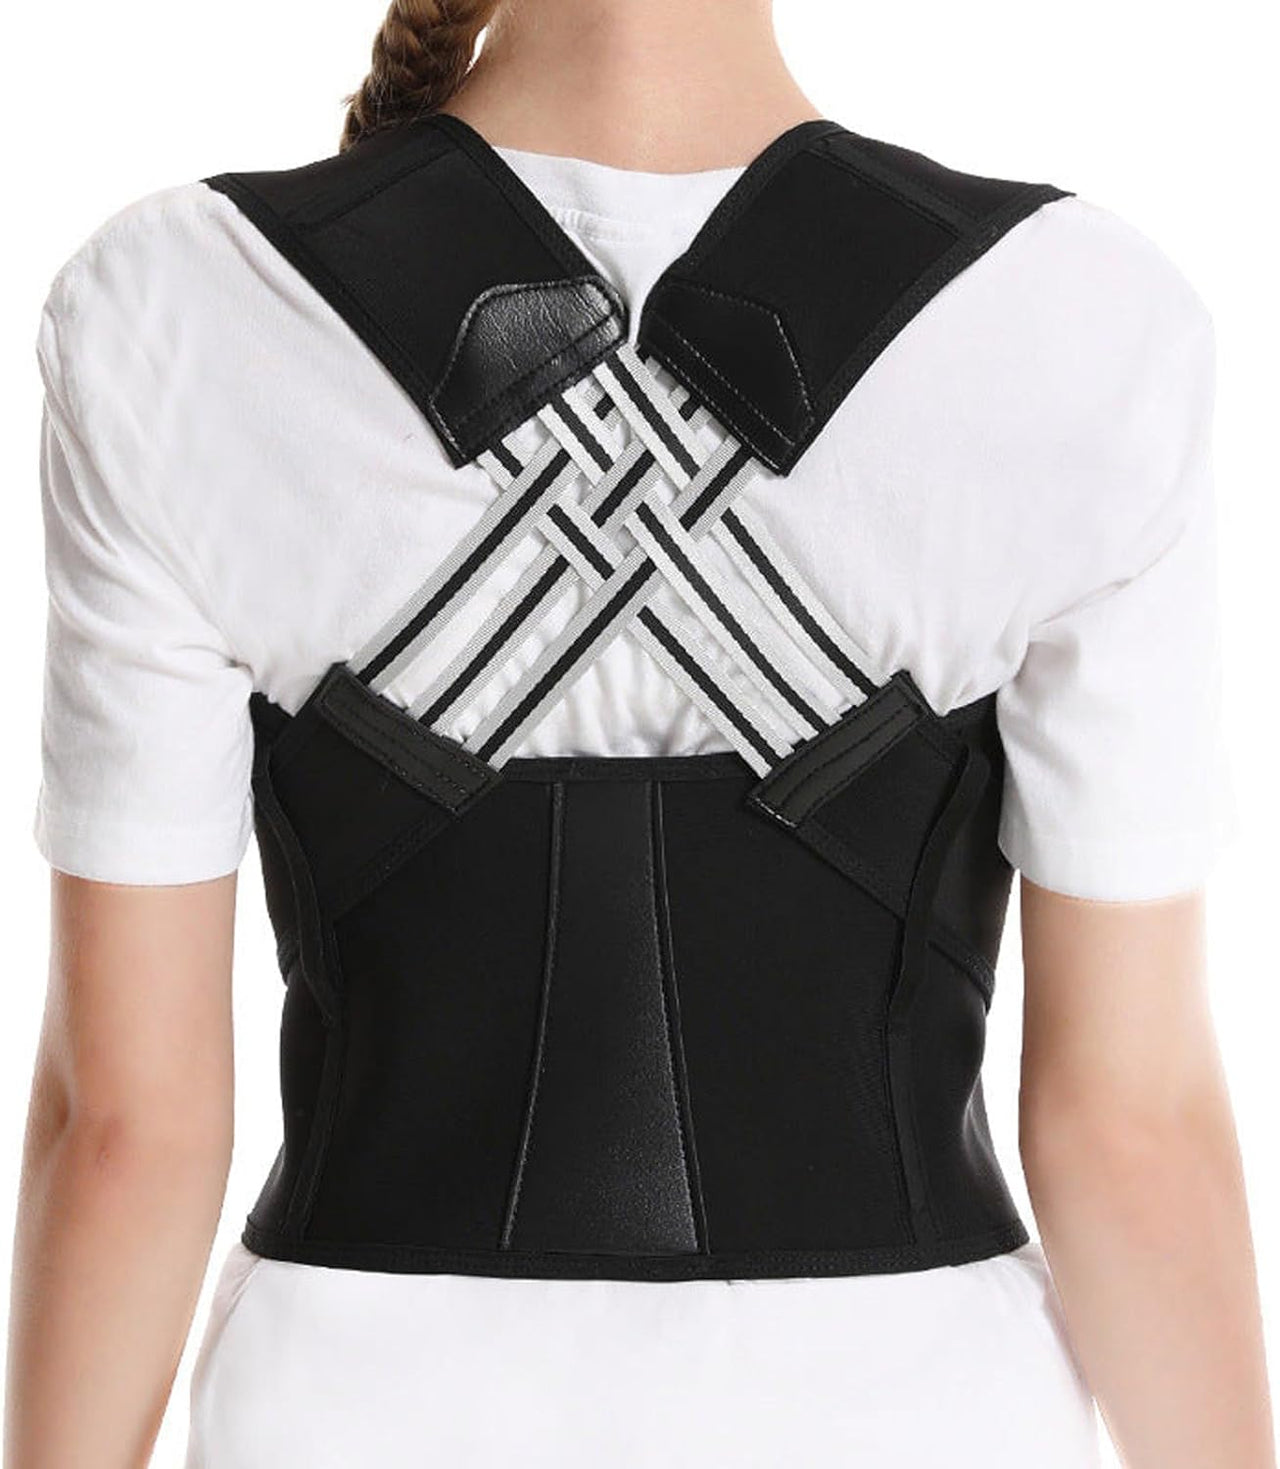 Posture Corrective Therapy Back Brace For Men & Women